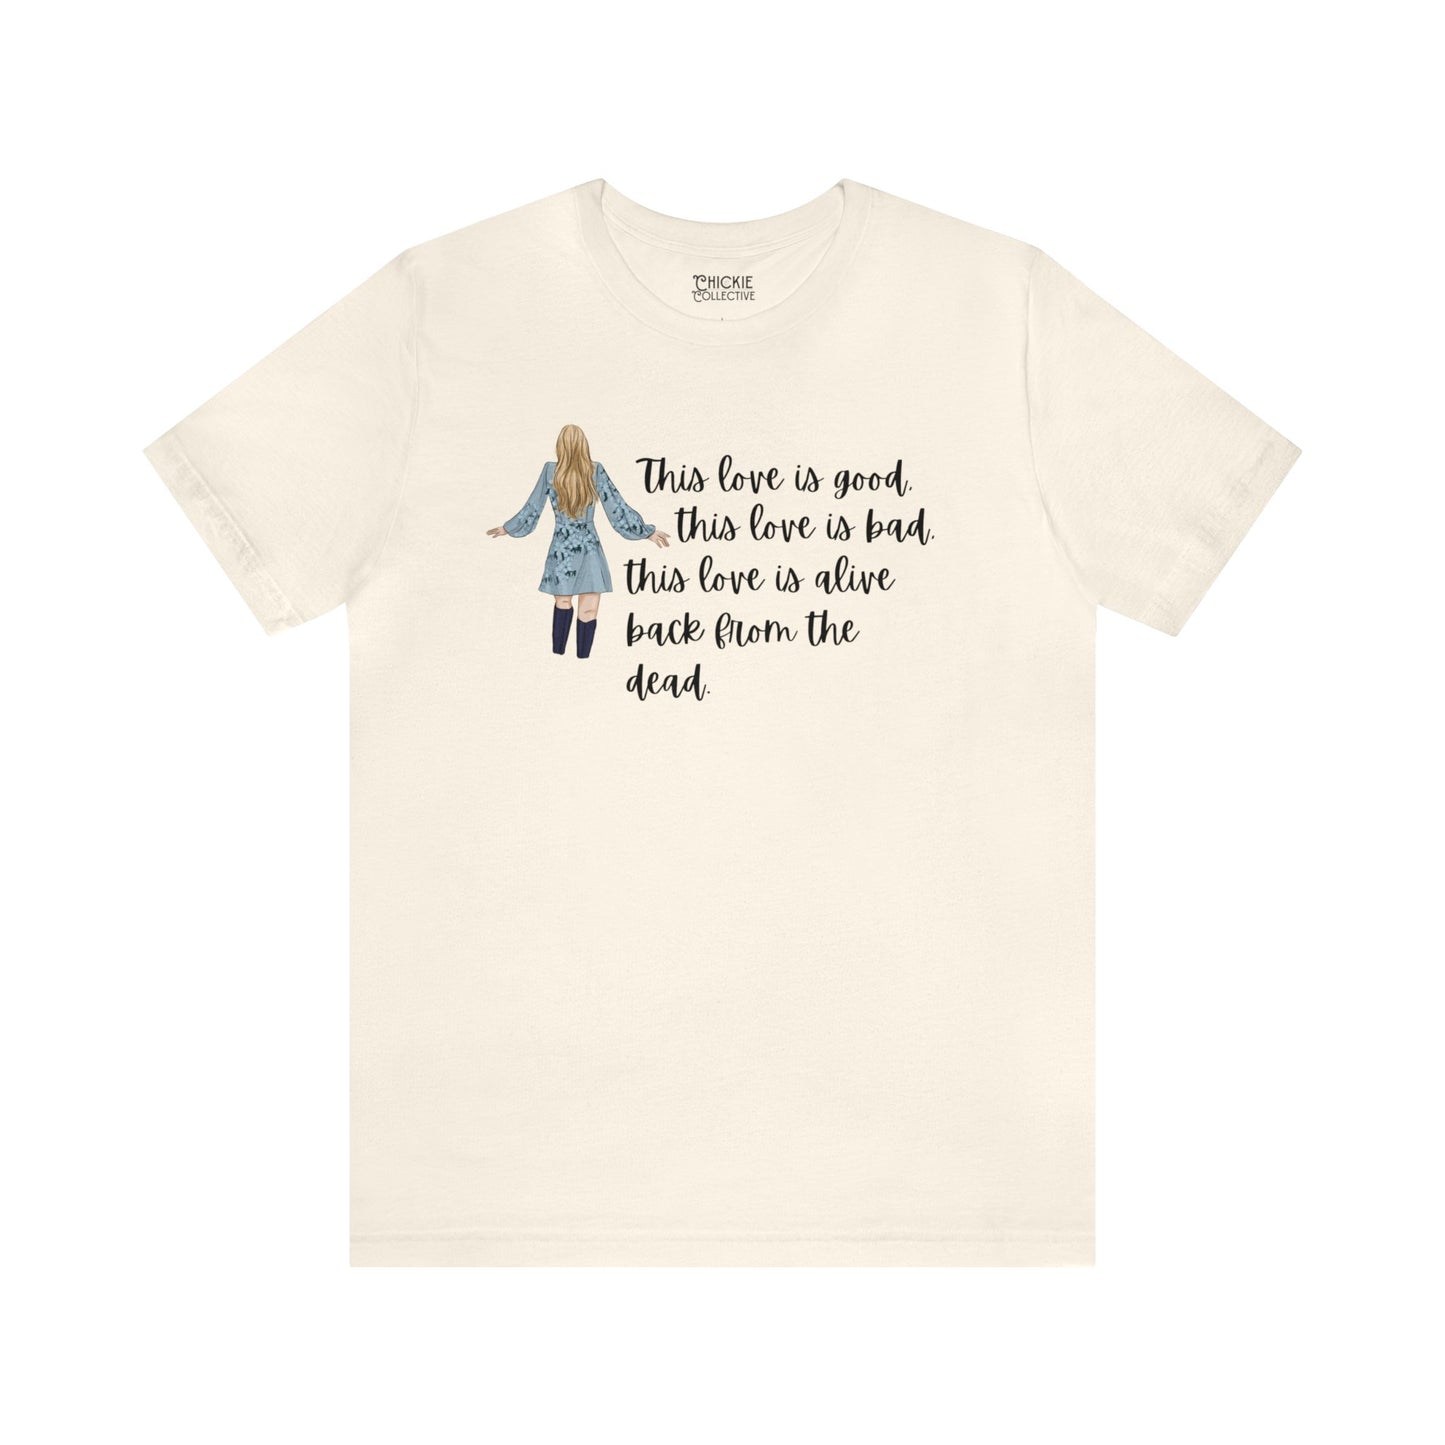 Taylor Swift Preppy Picture T-Shirt - This Love Is Good, This Love Is Bad T-Shirt Natural S  - Chickie Collective